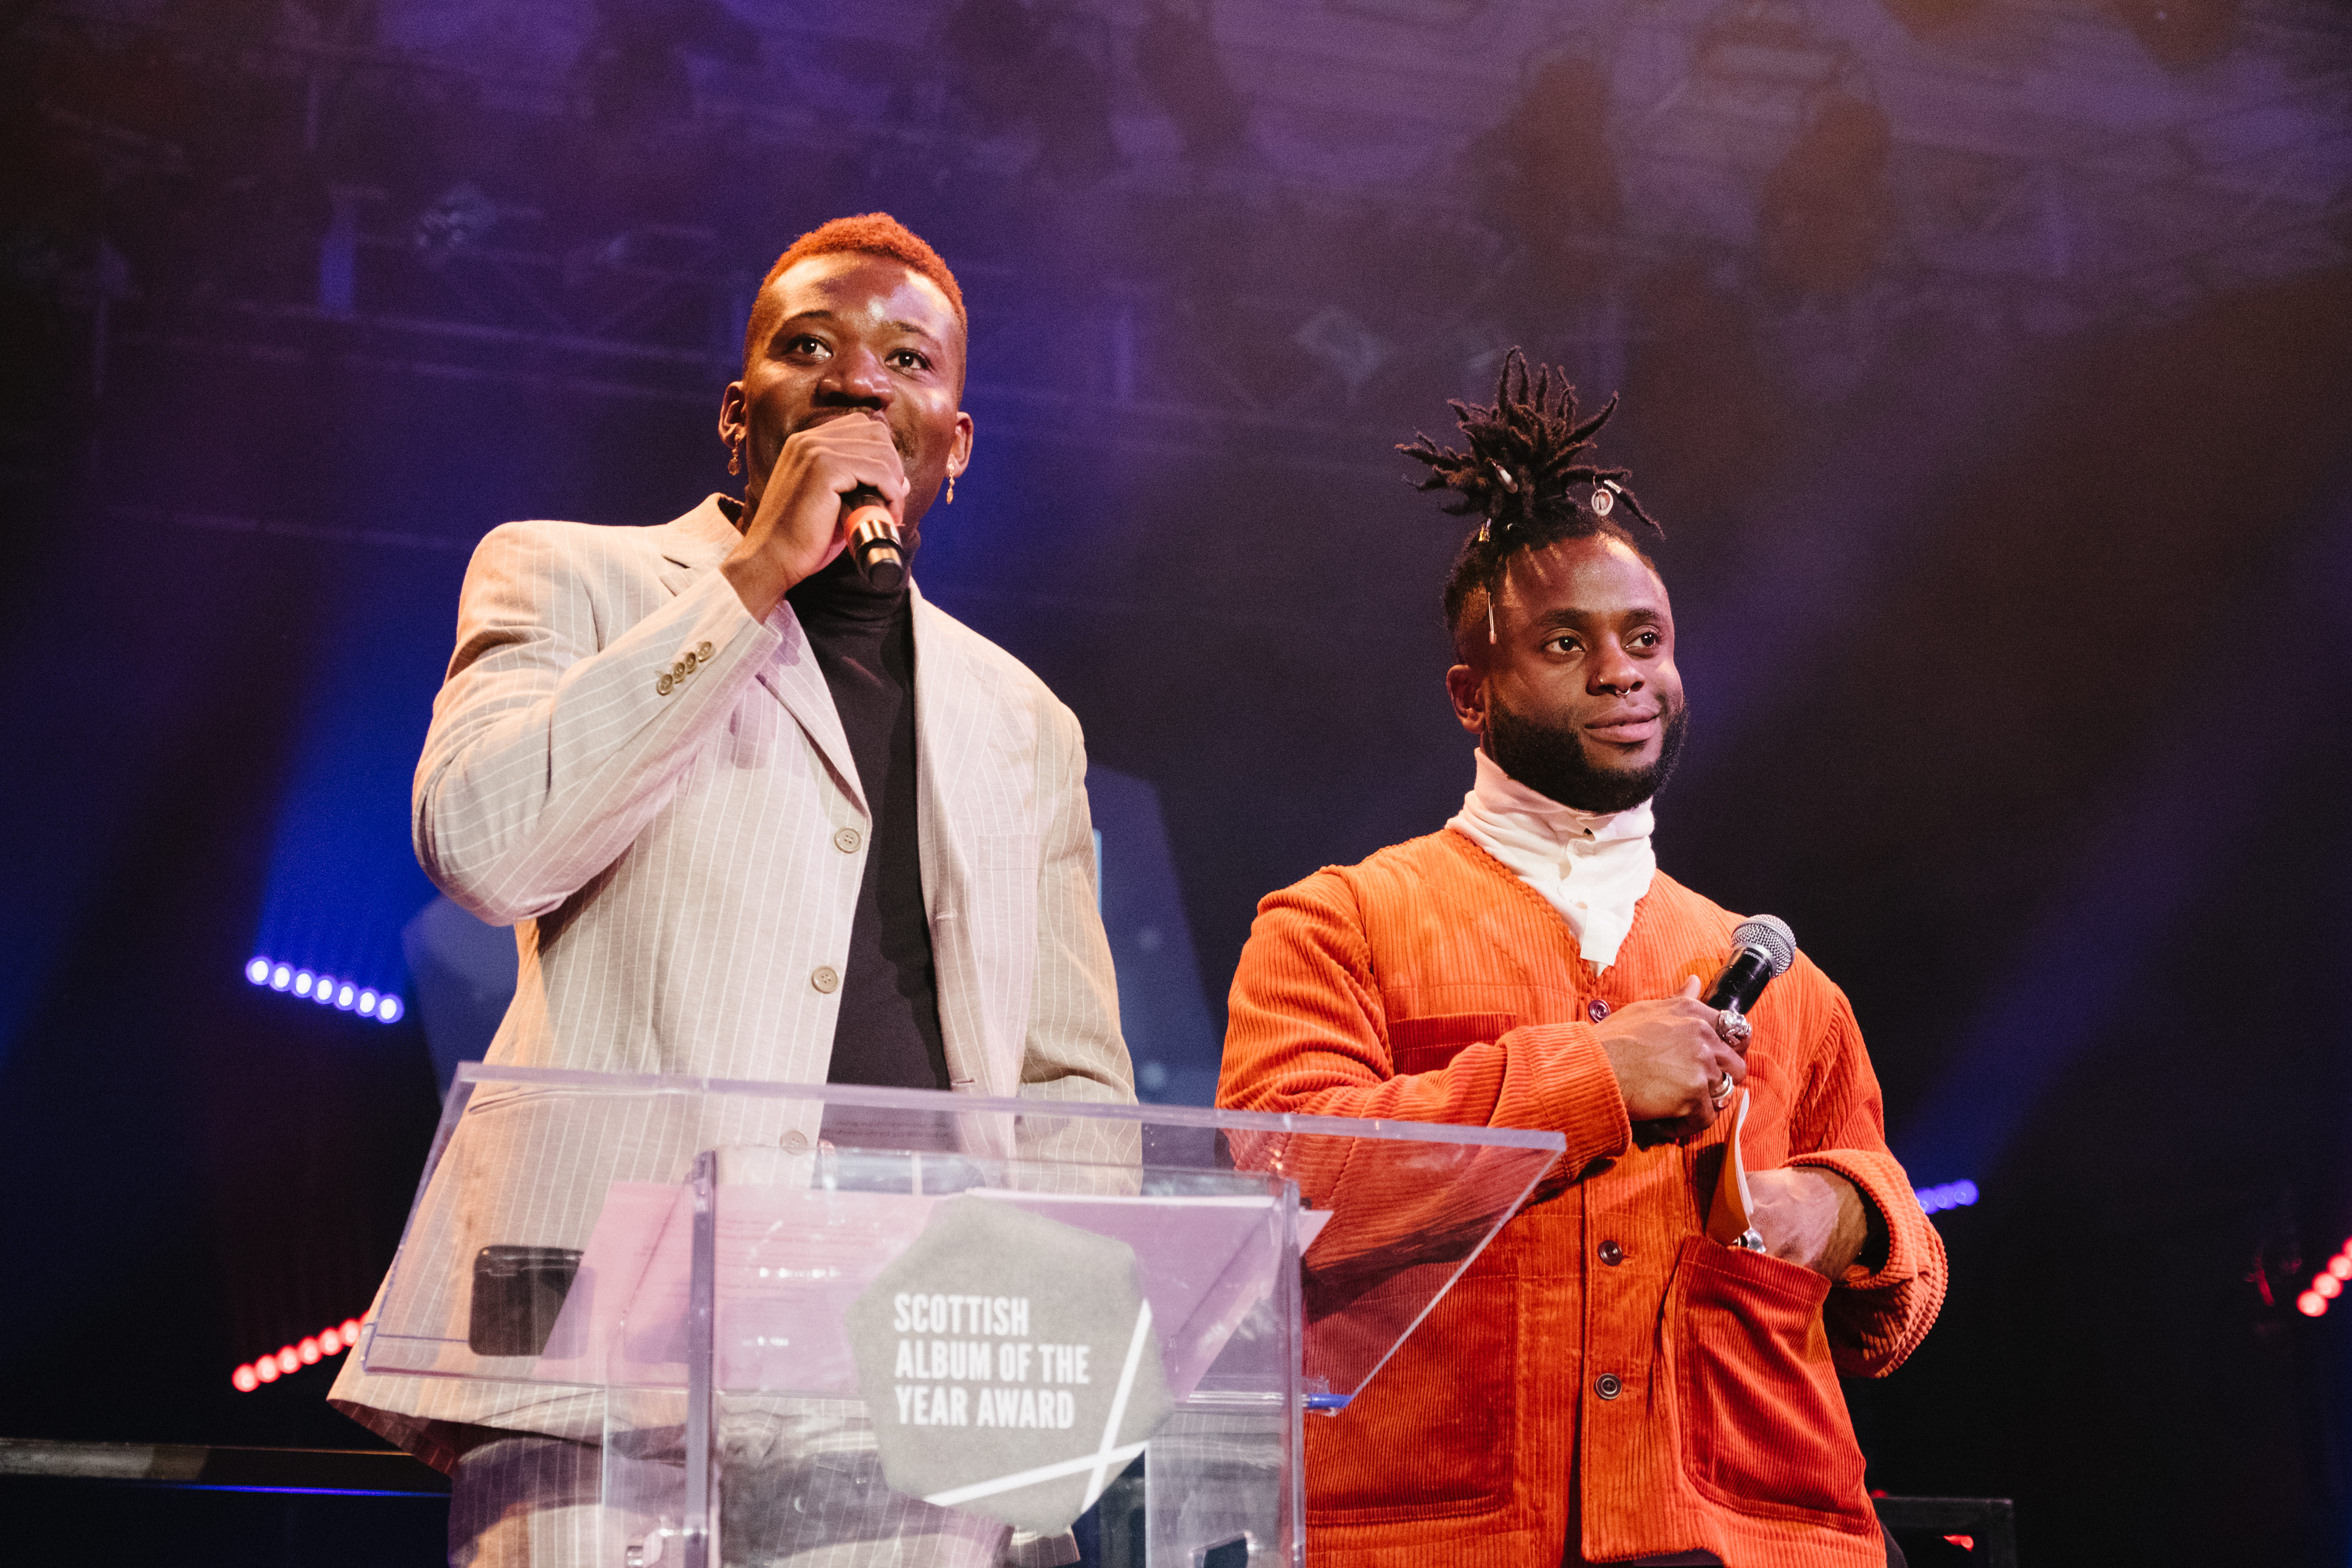 Young Fathers were last year's SAY Award winners